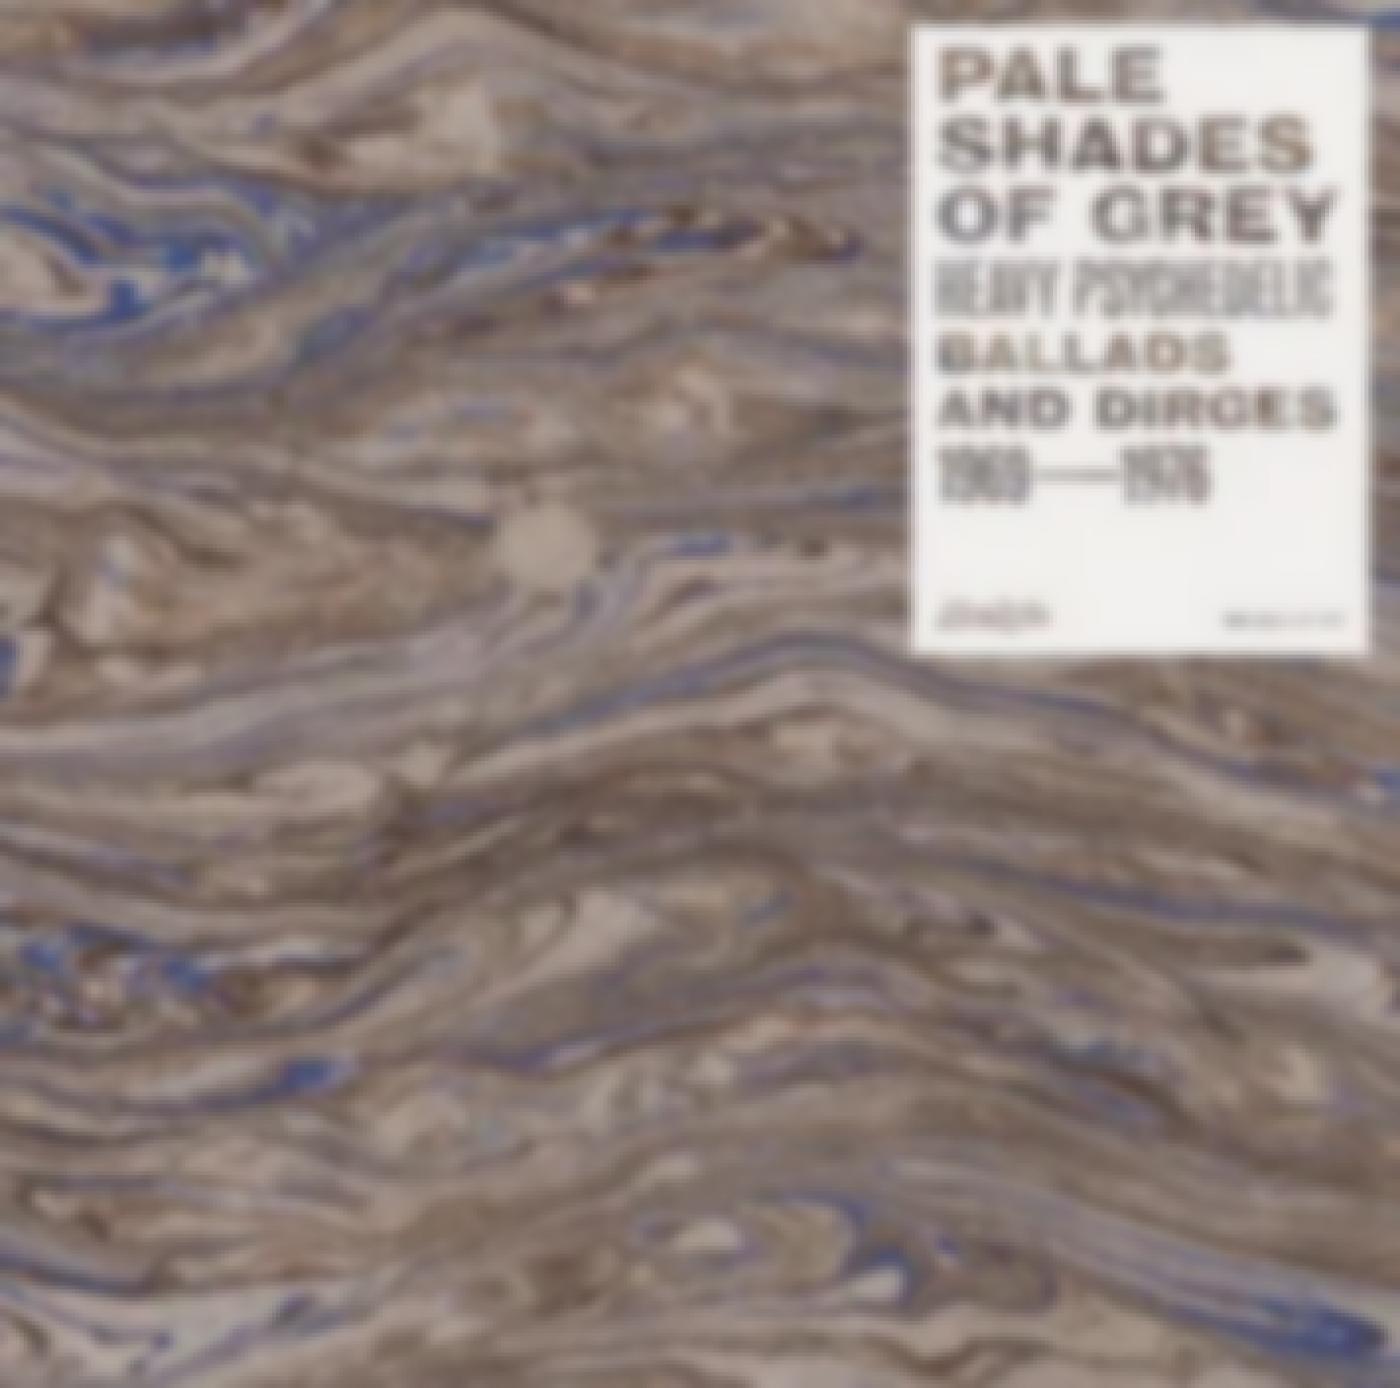 RSD2024 - Pale Shades Of Grey: Heavy Psychedelic Ballads & Dirges 1969-1976